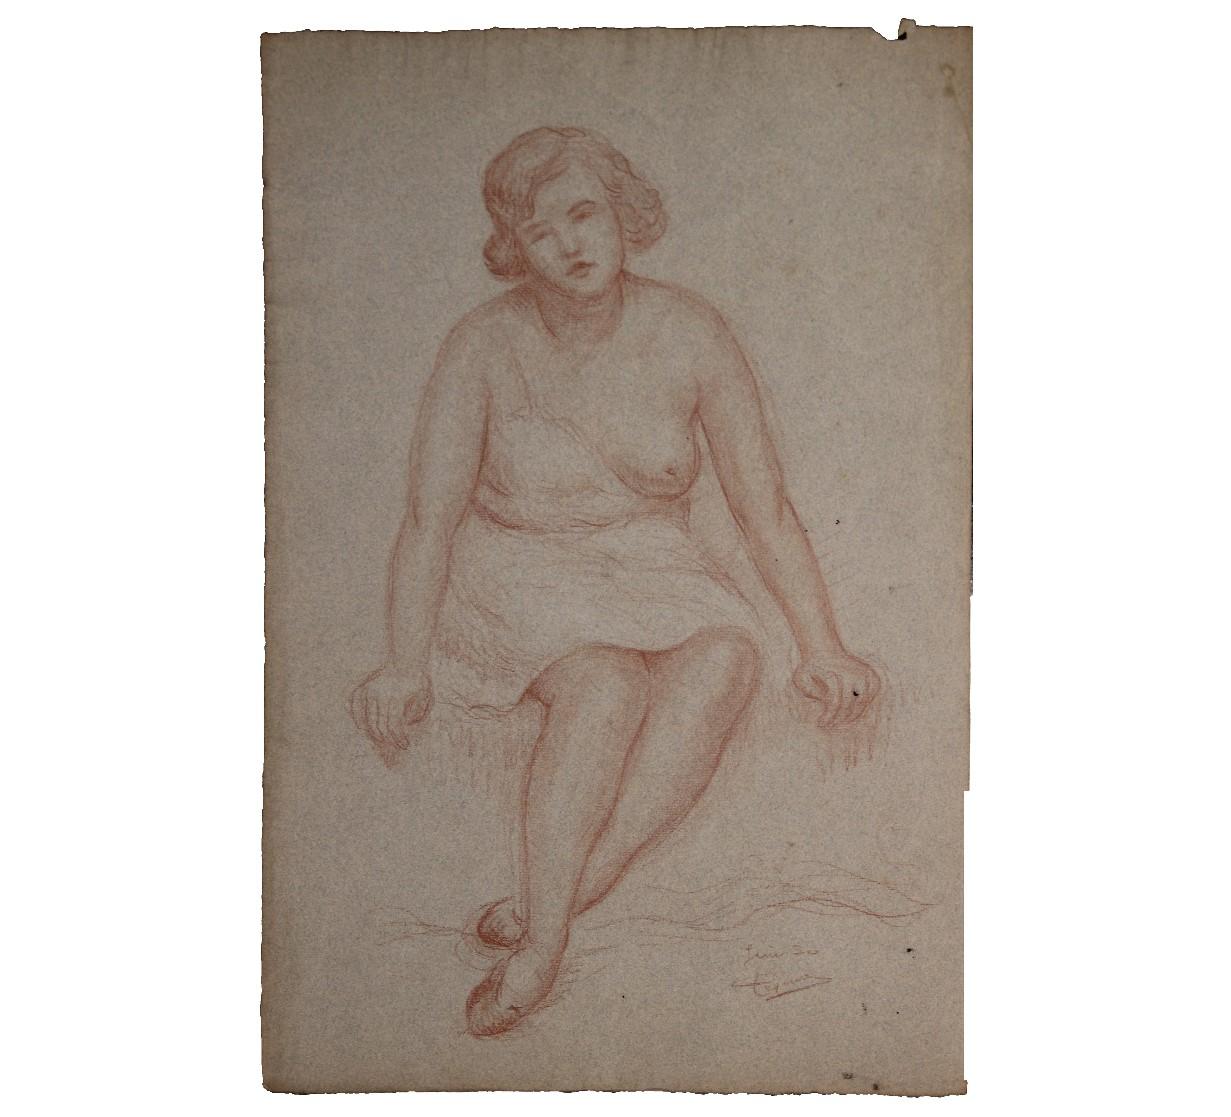 Portrait Study of a Seated Woman